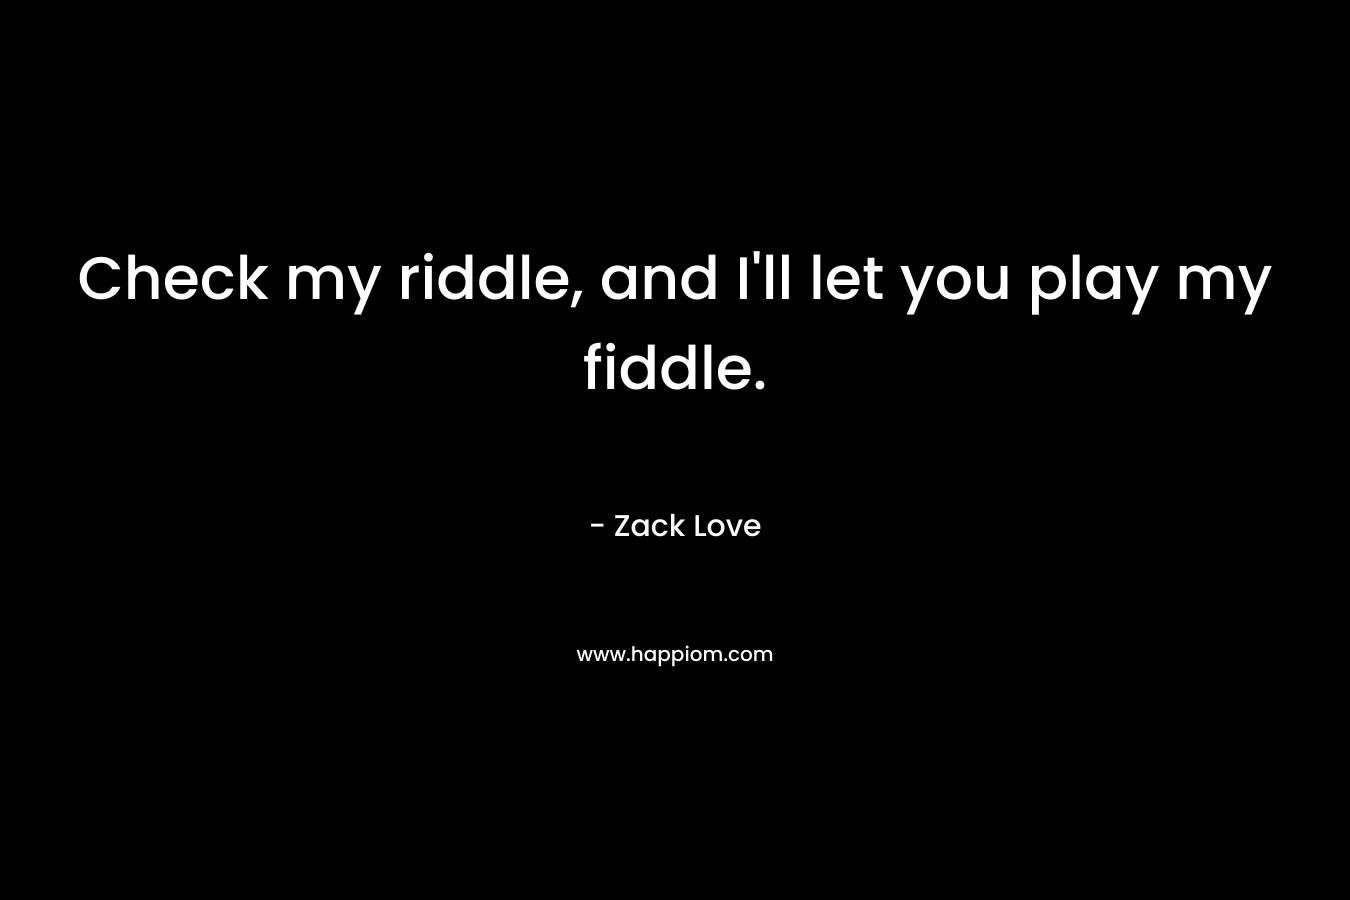 Check my riddle, and I’ll let you play my fiddle. – Zack Love